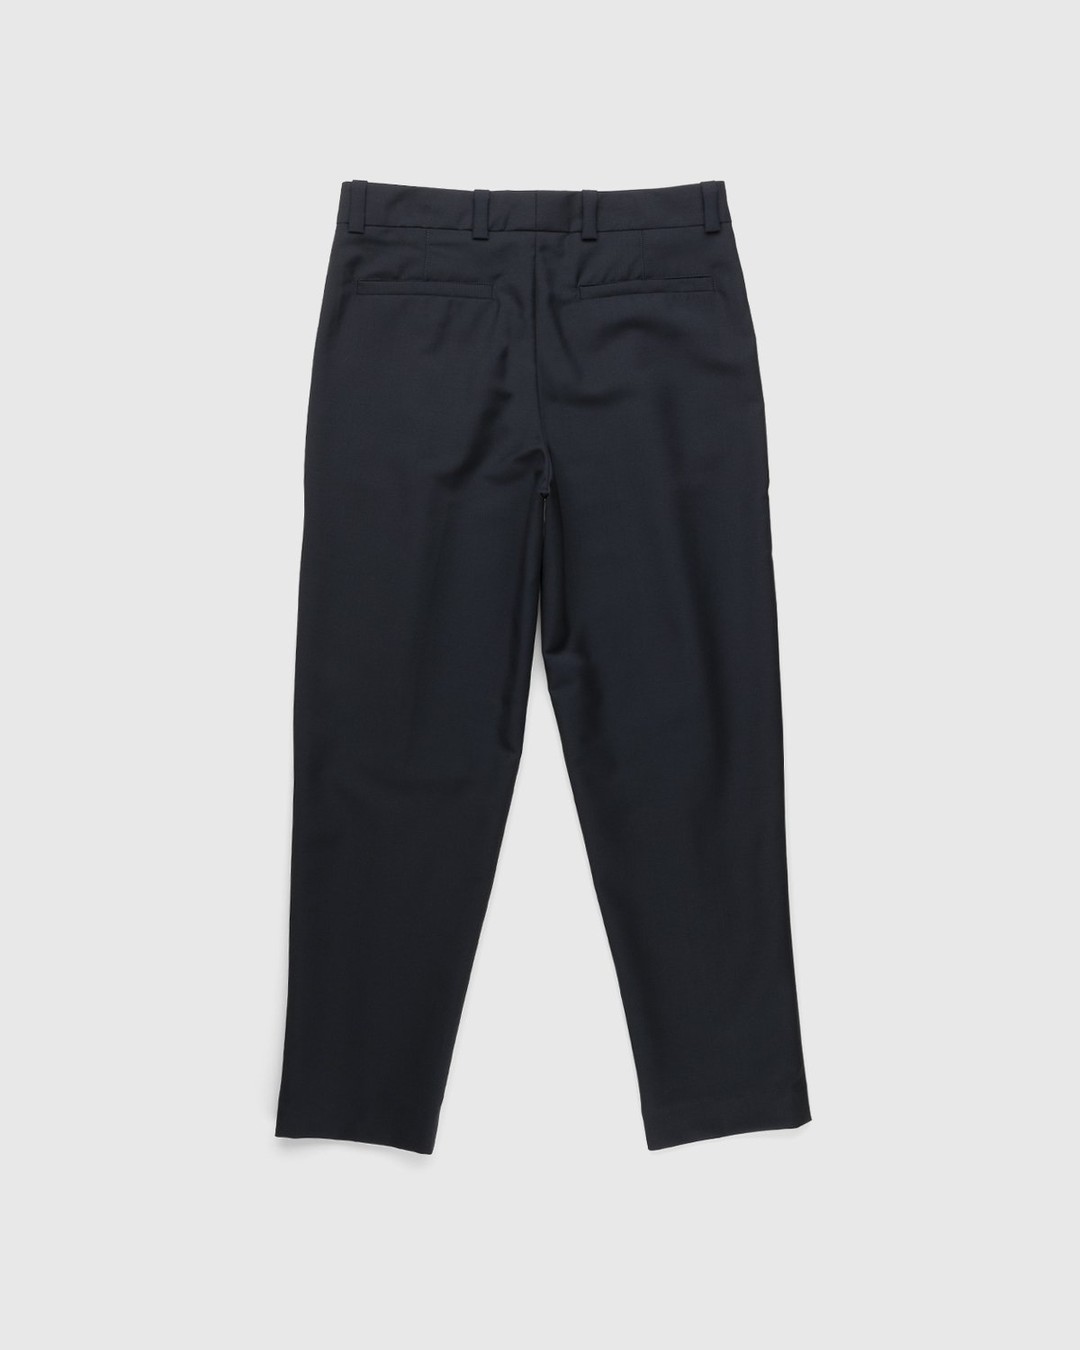 Acne Studios – Mohair Pleated Trousers Navy - Pants - Blue - Image 2